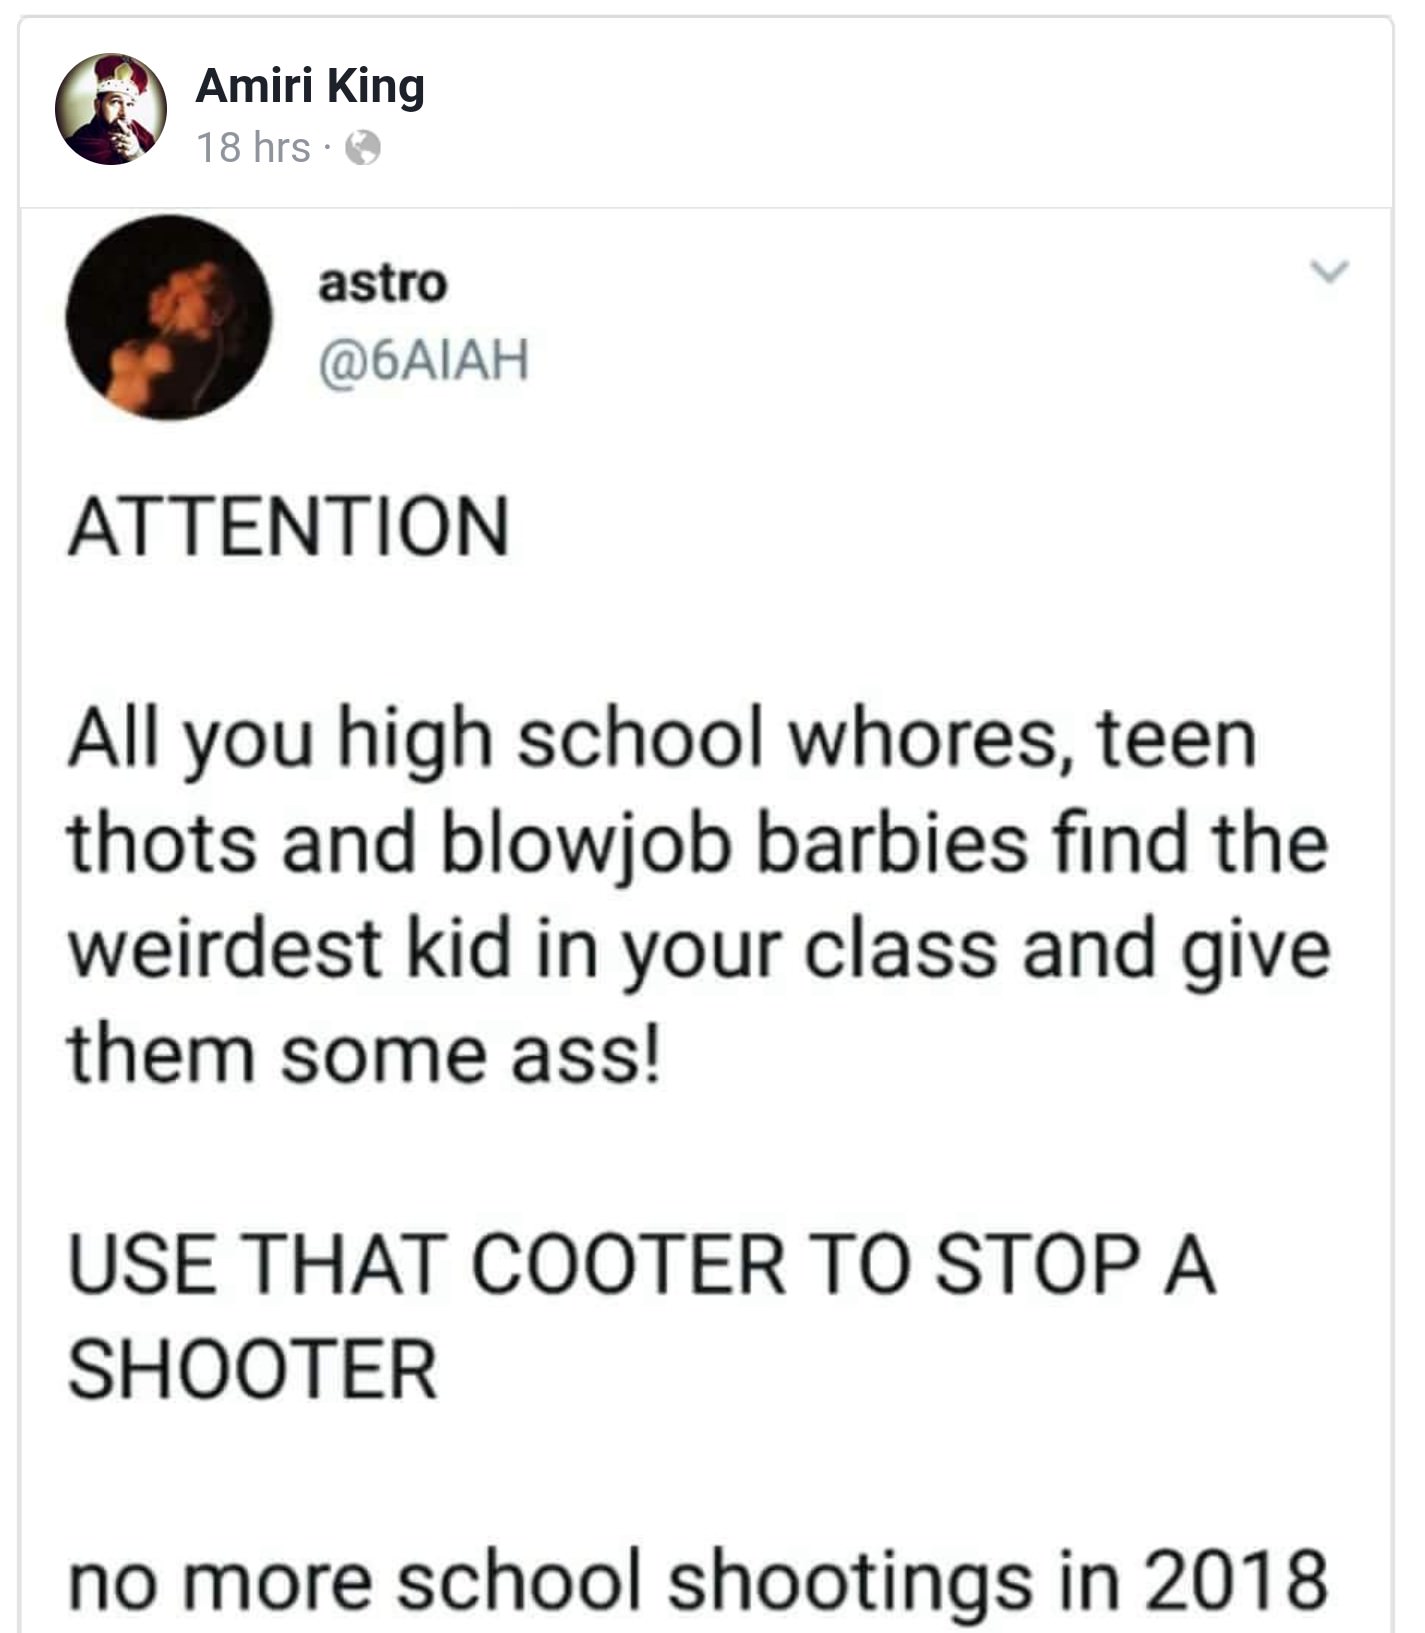 all those hoes find the weirdest kid - Amiri King 18 hrs. astro Attention All you high school whores, teen thots and blowjob barbies find the weirdest kid in your class and give them some ass! Use That Cooter To Stop A. Shooter no more school shootings in